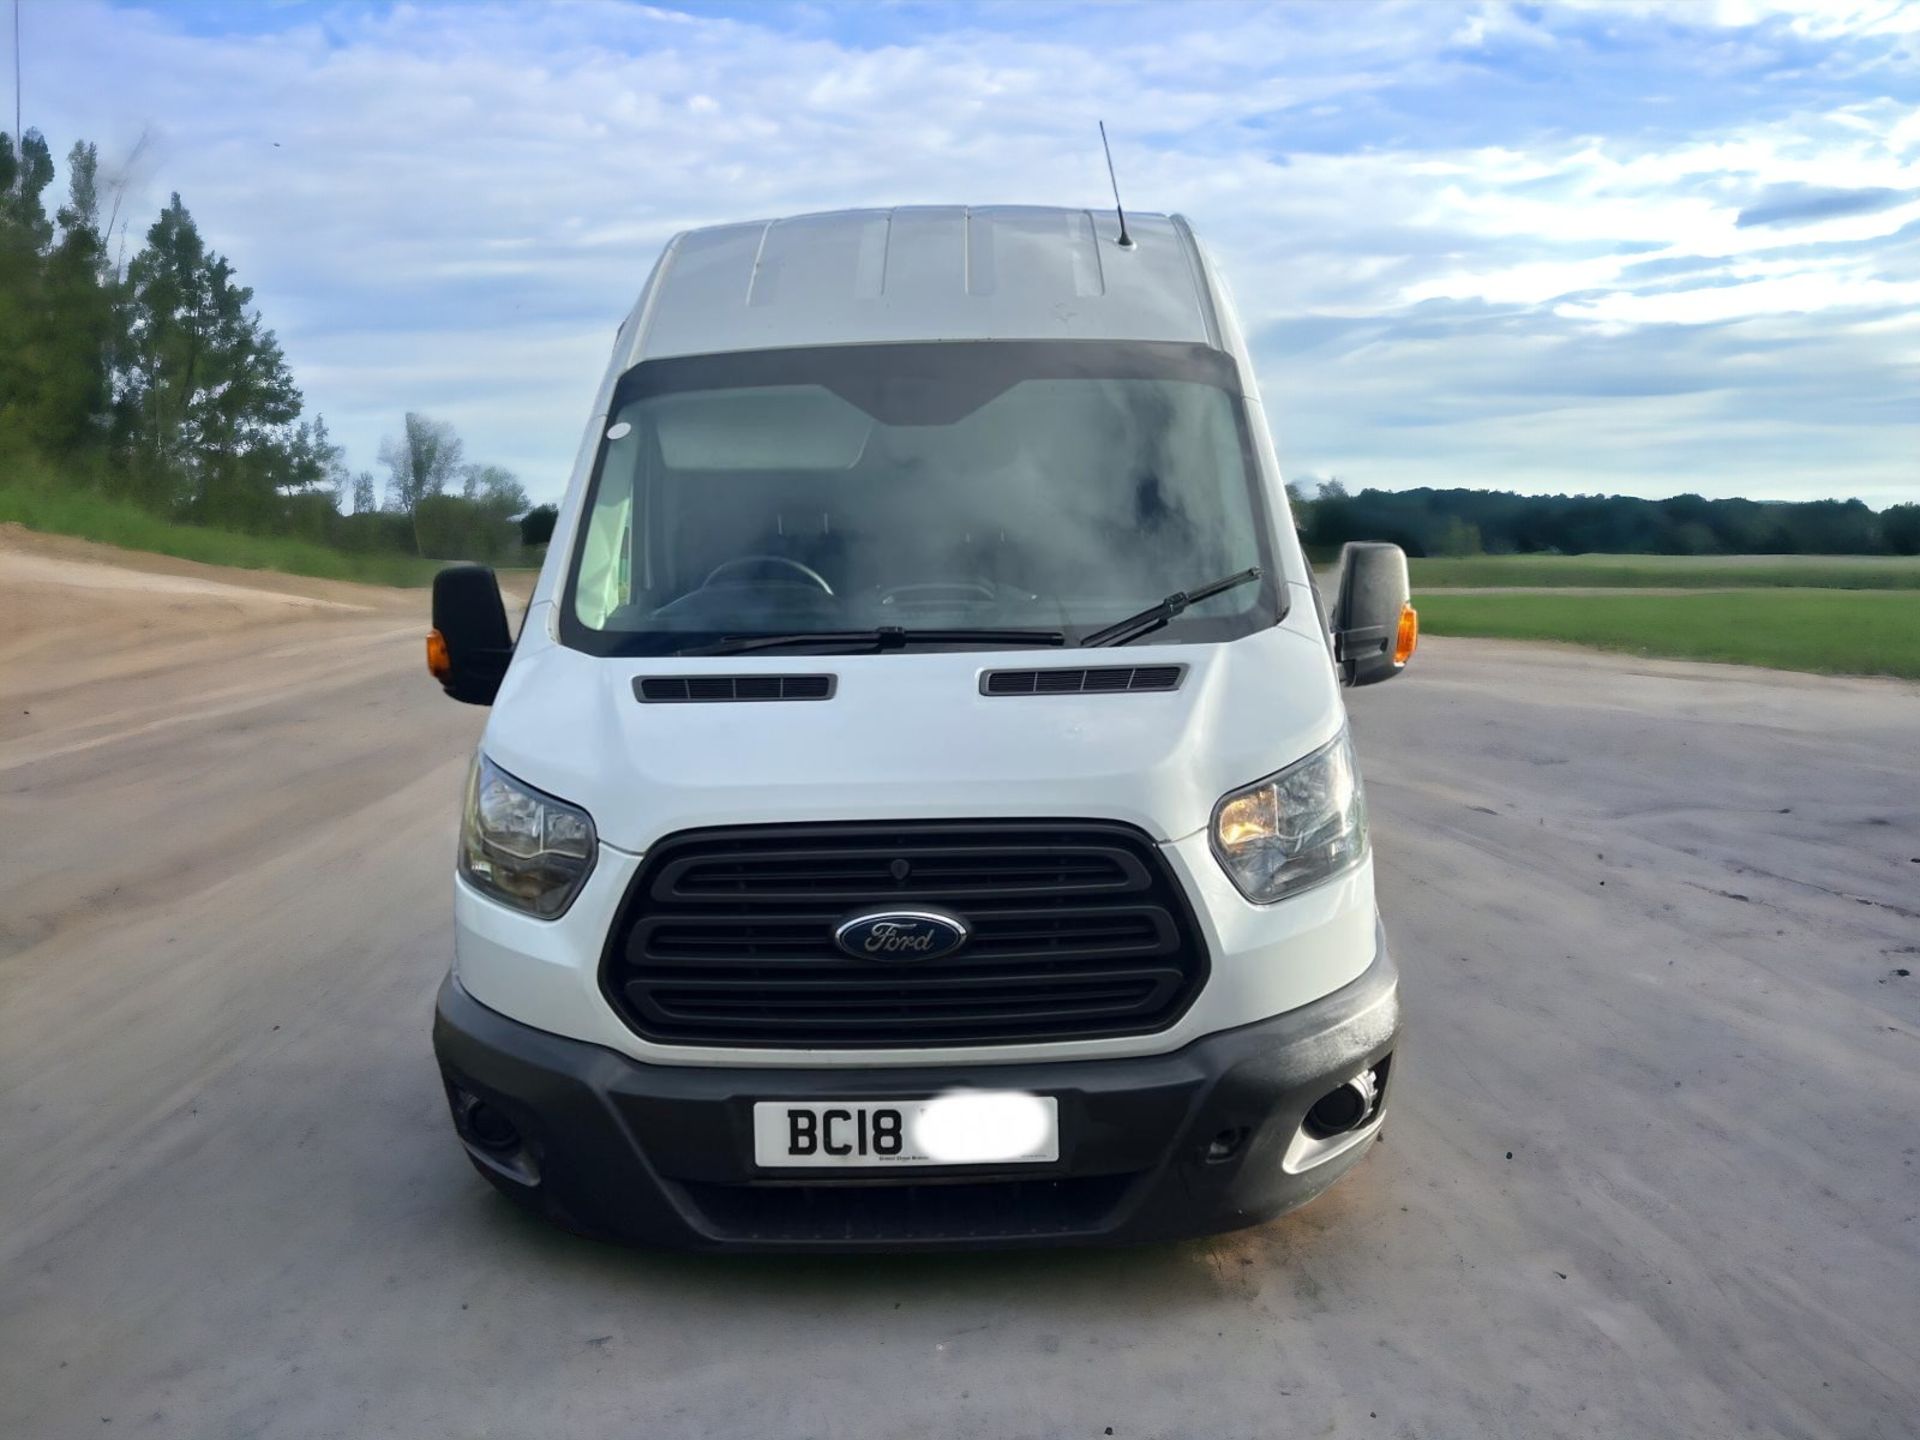 2018 FORD TRANSIT T350 LWB JUMBO L4H3 - SPACIOUS AND RELIABLE WORKHORSE